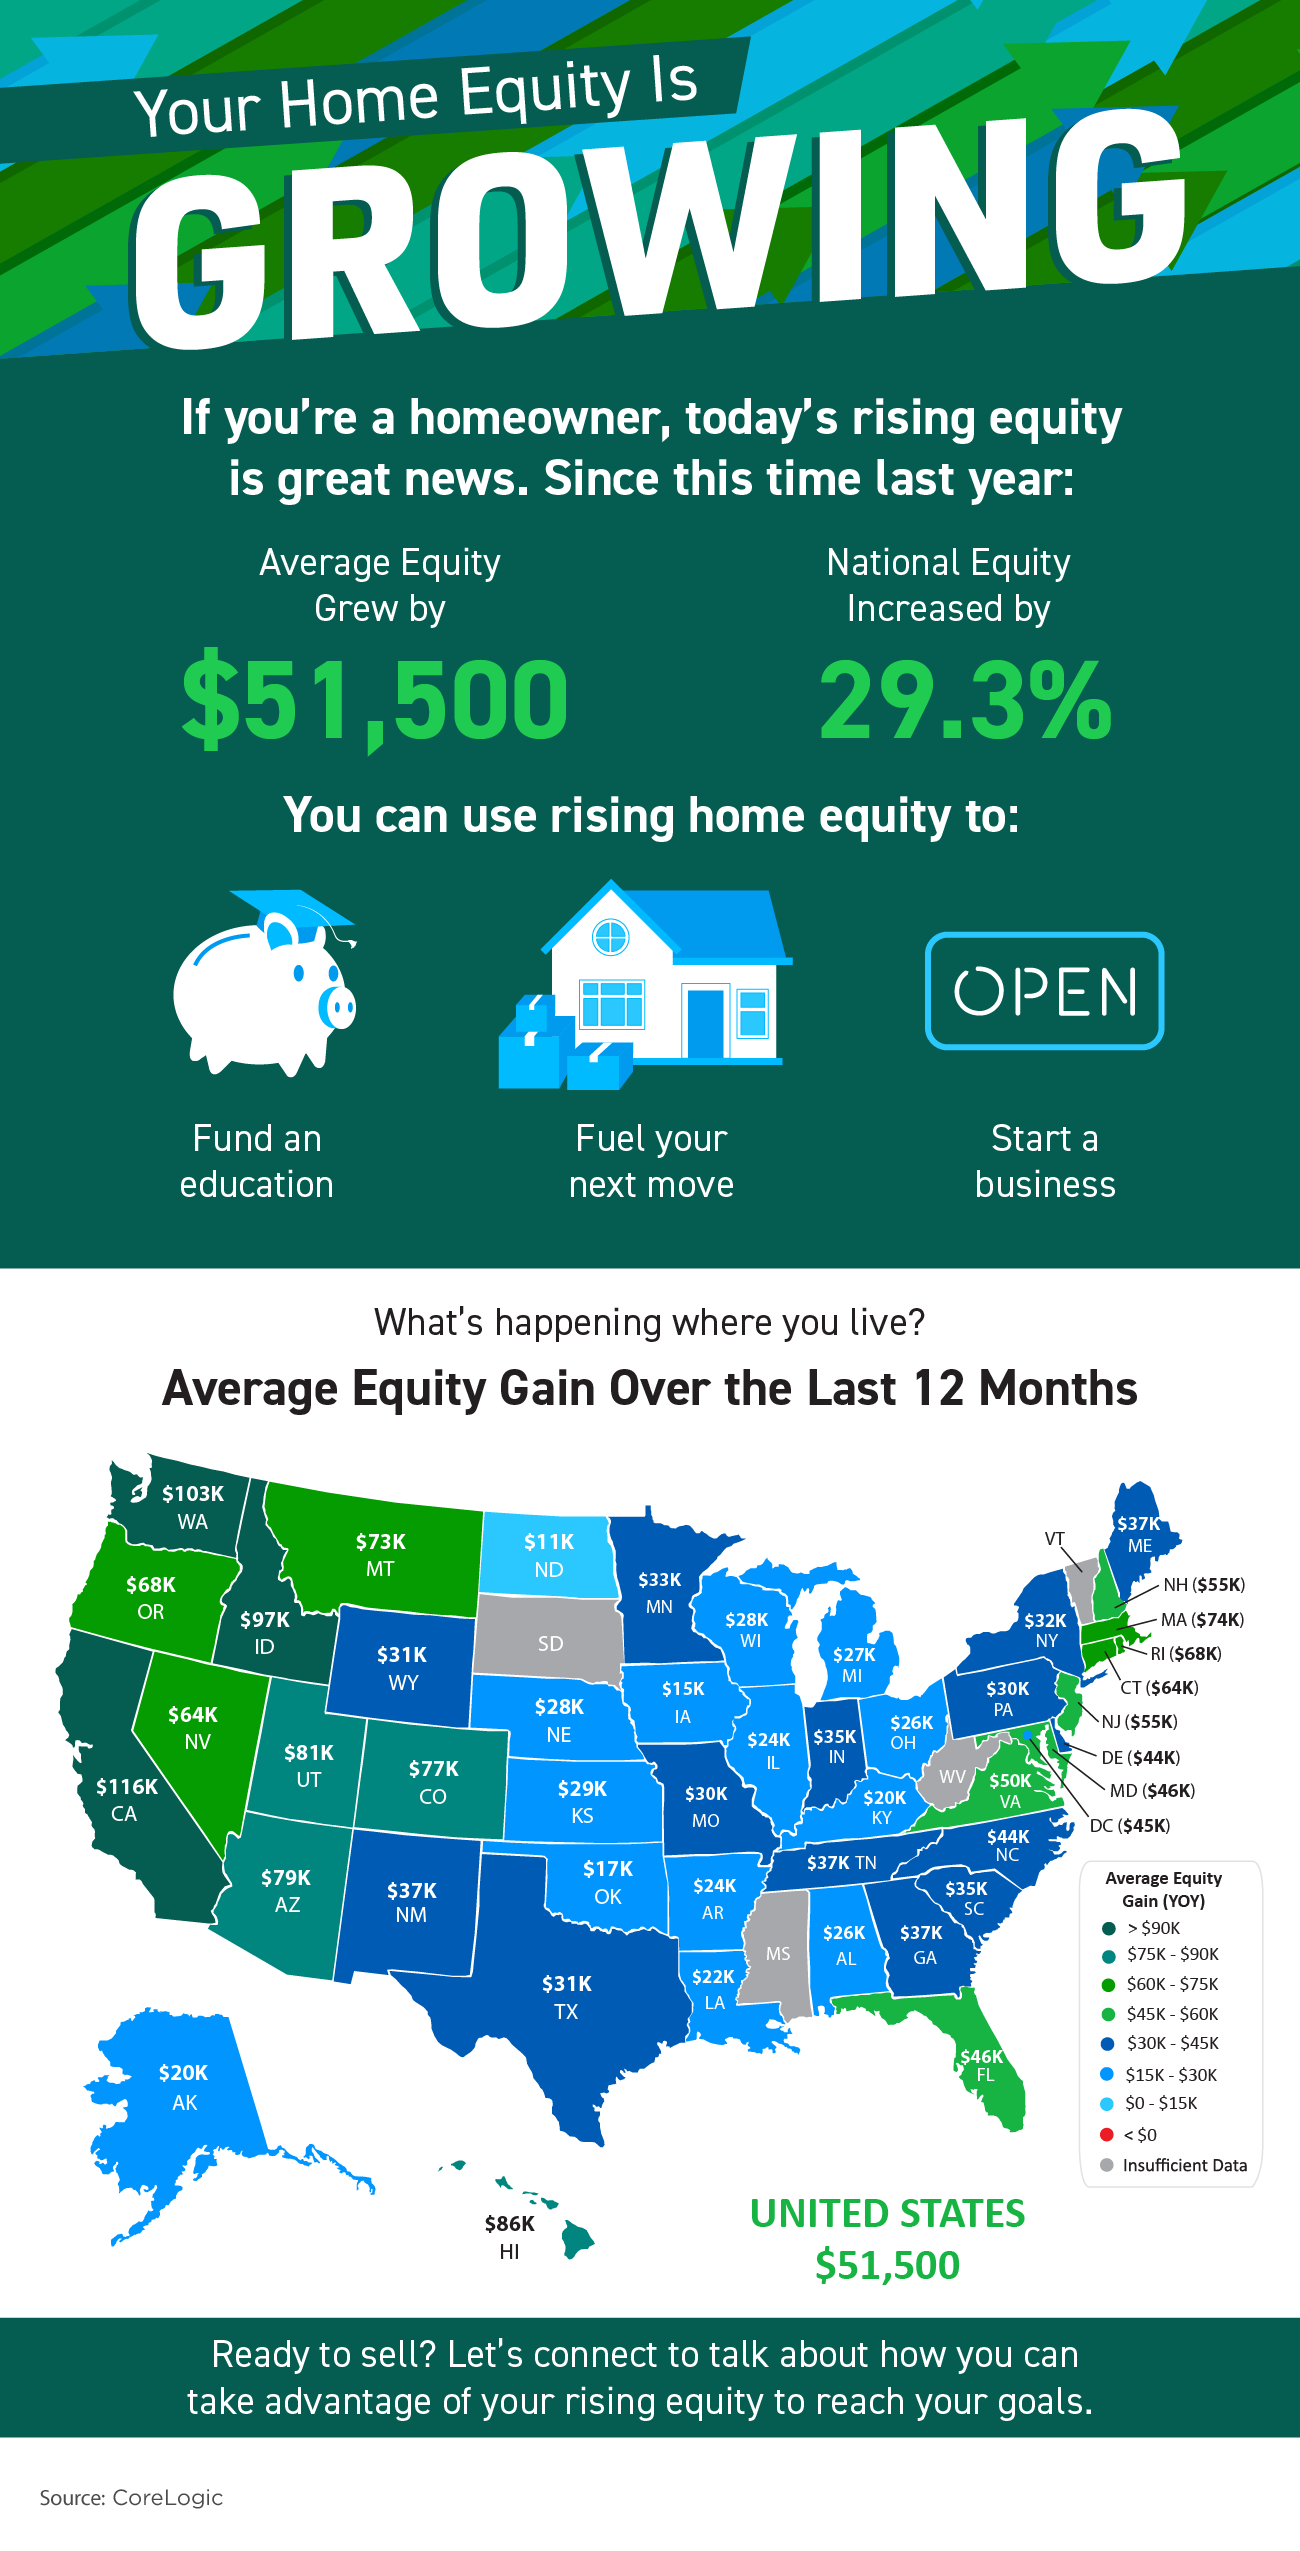 Equity Increase Shows Housing Market's Strength